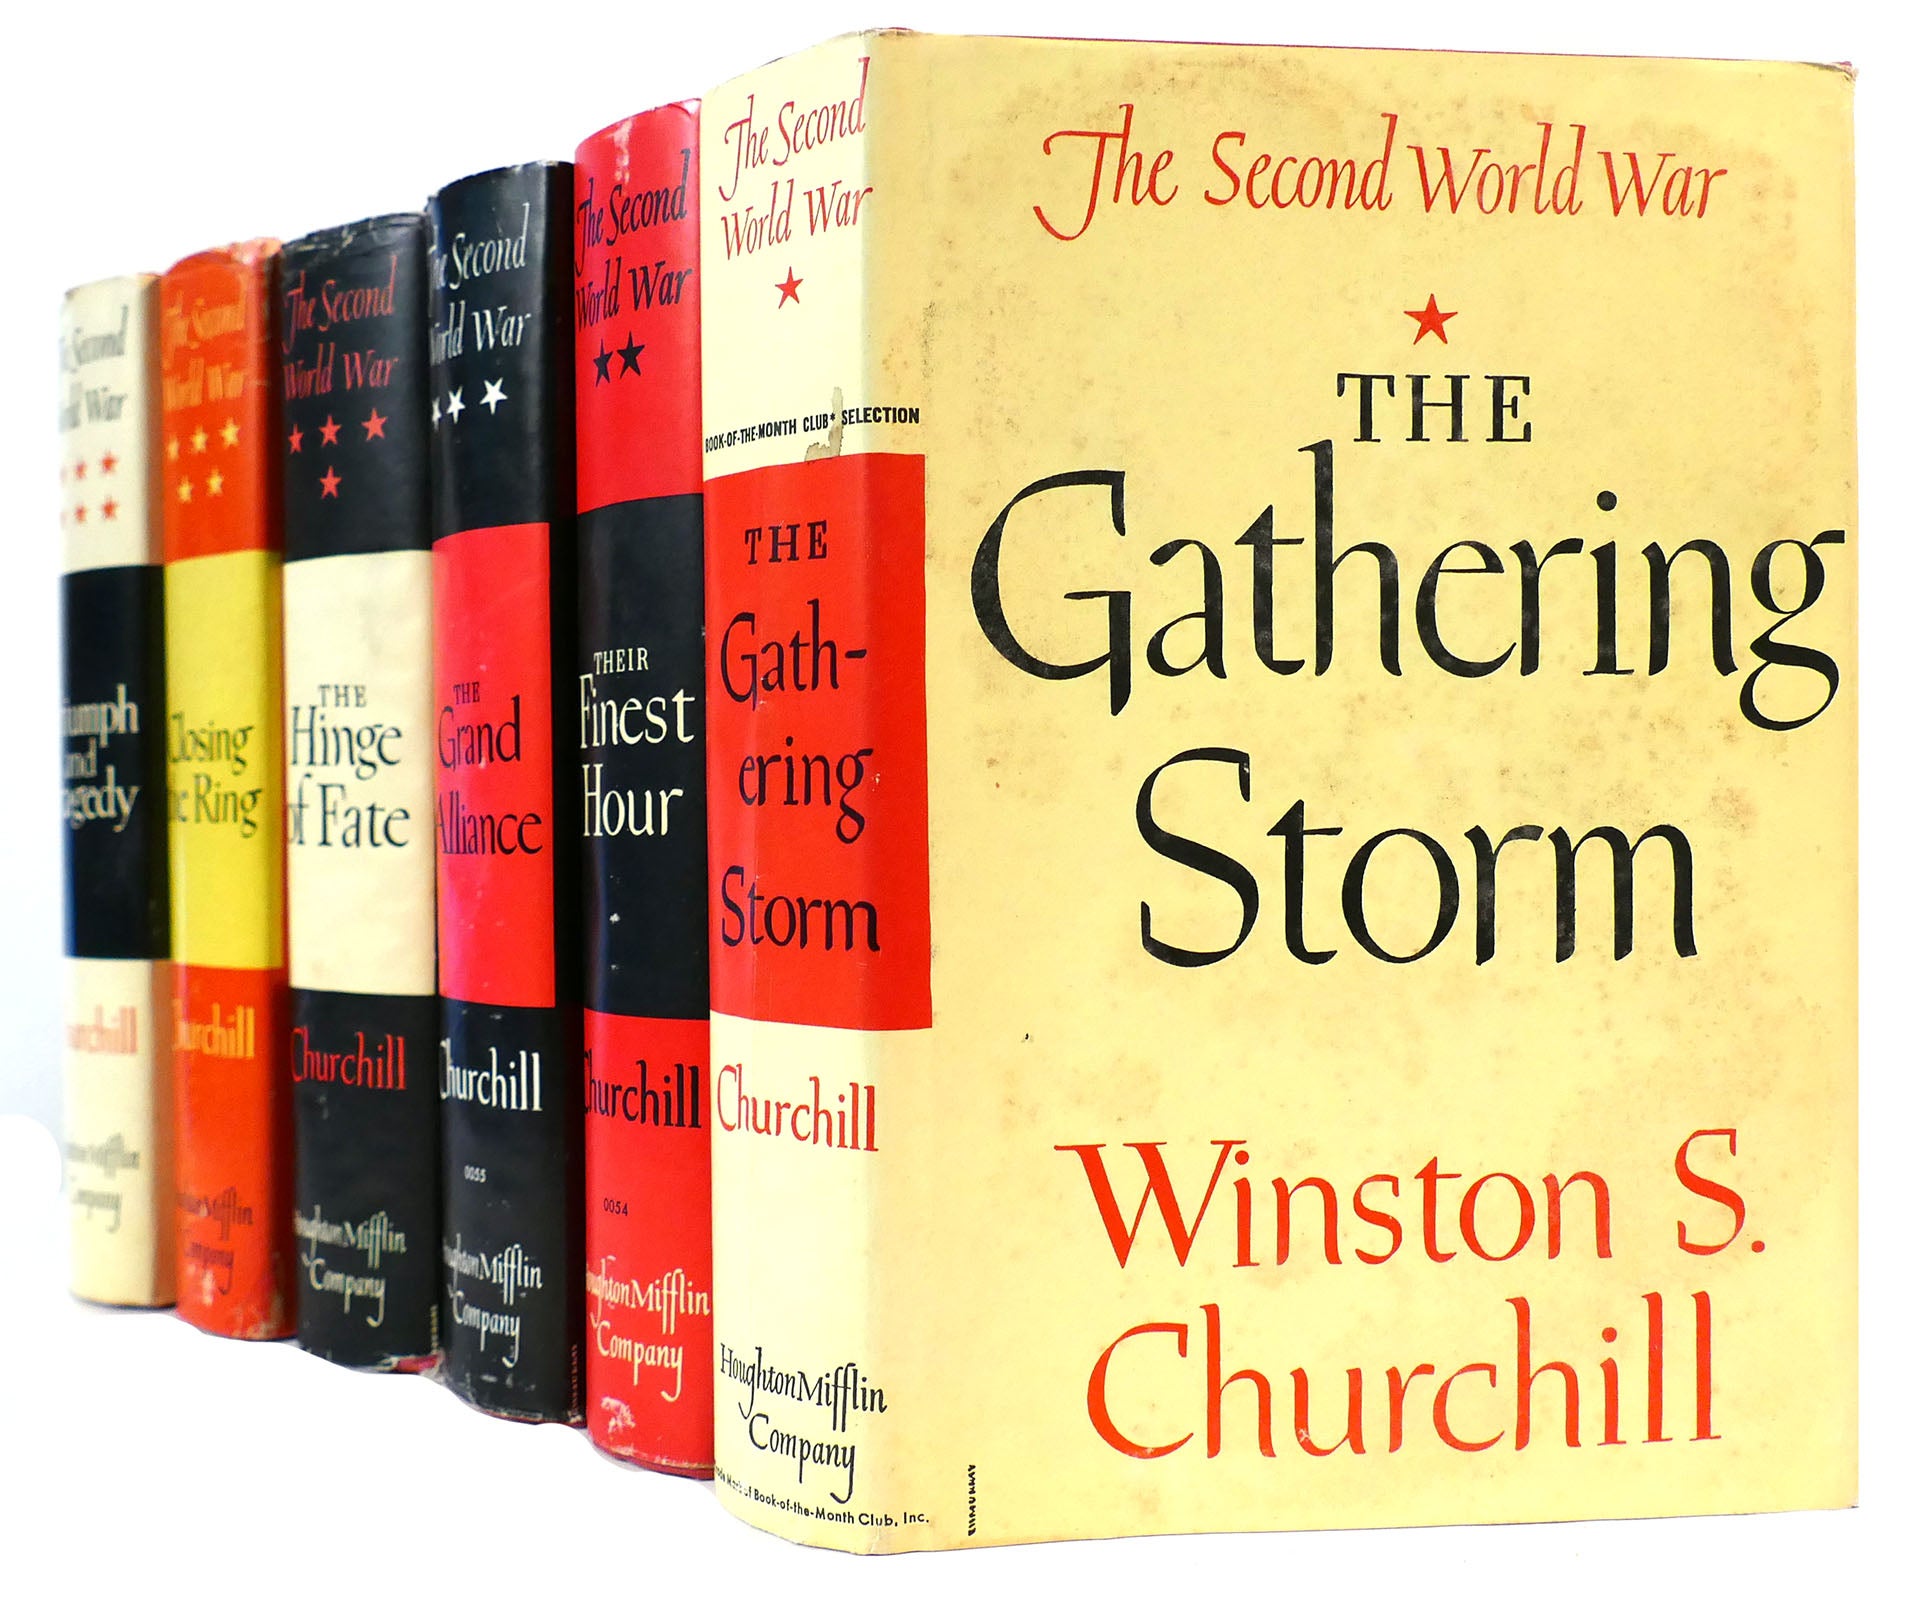 Closing the Ring by Winston S. Churchill (The Second World War